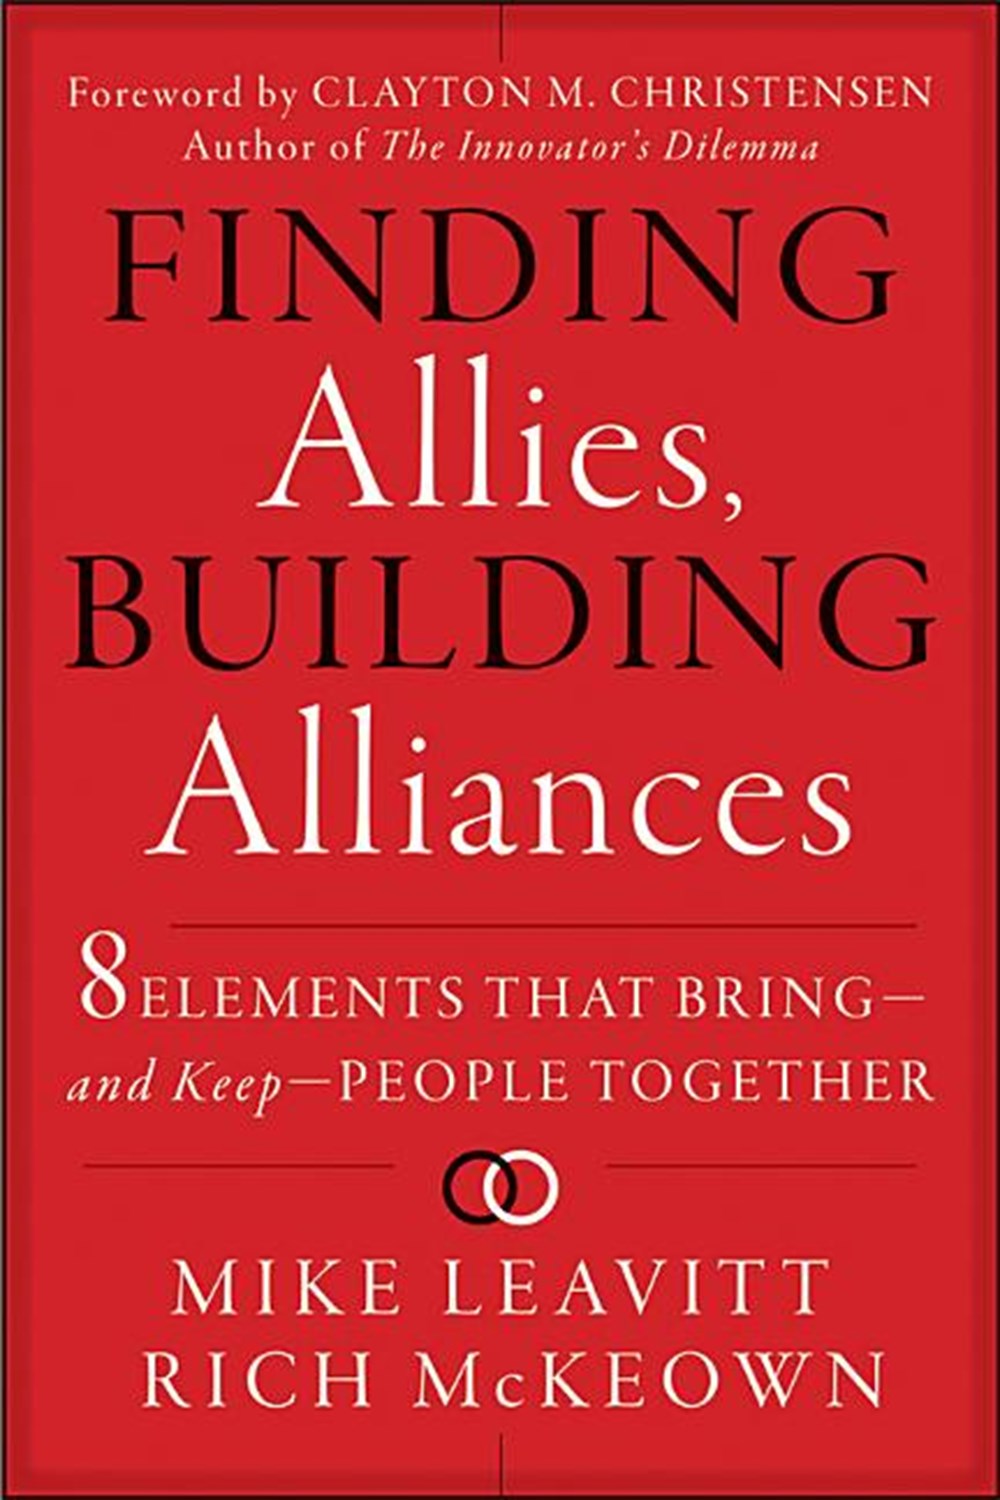 Finding Allies, Building Alliances 8 Elements That Bring--And Keep--People Together